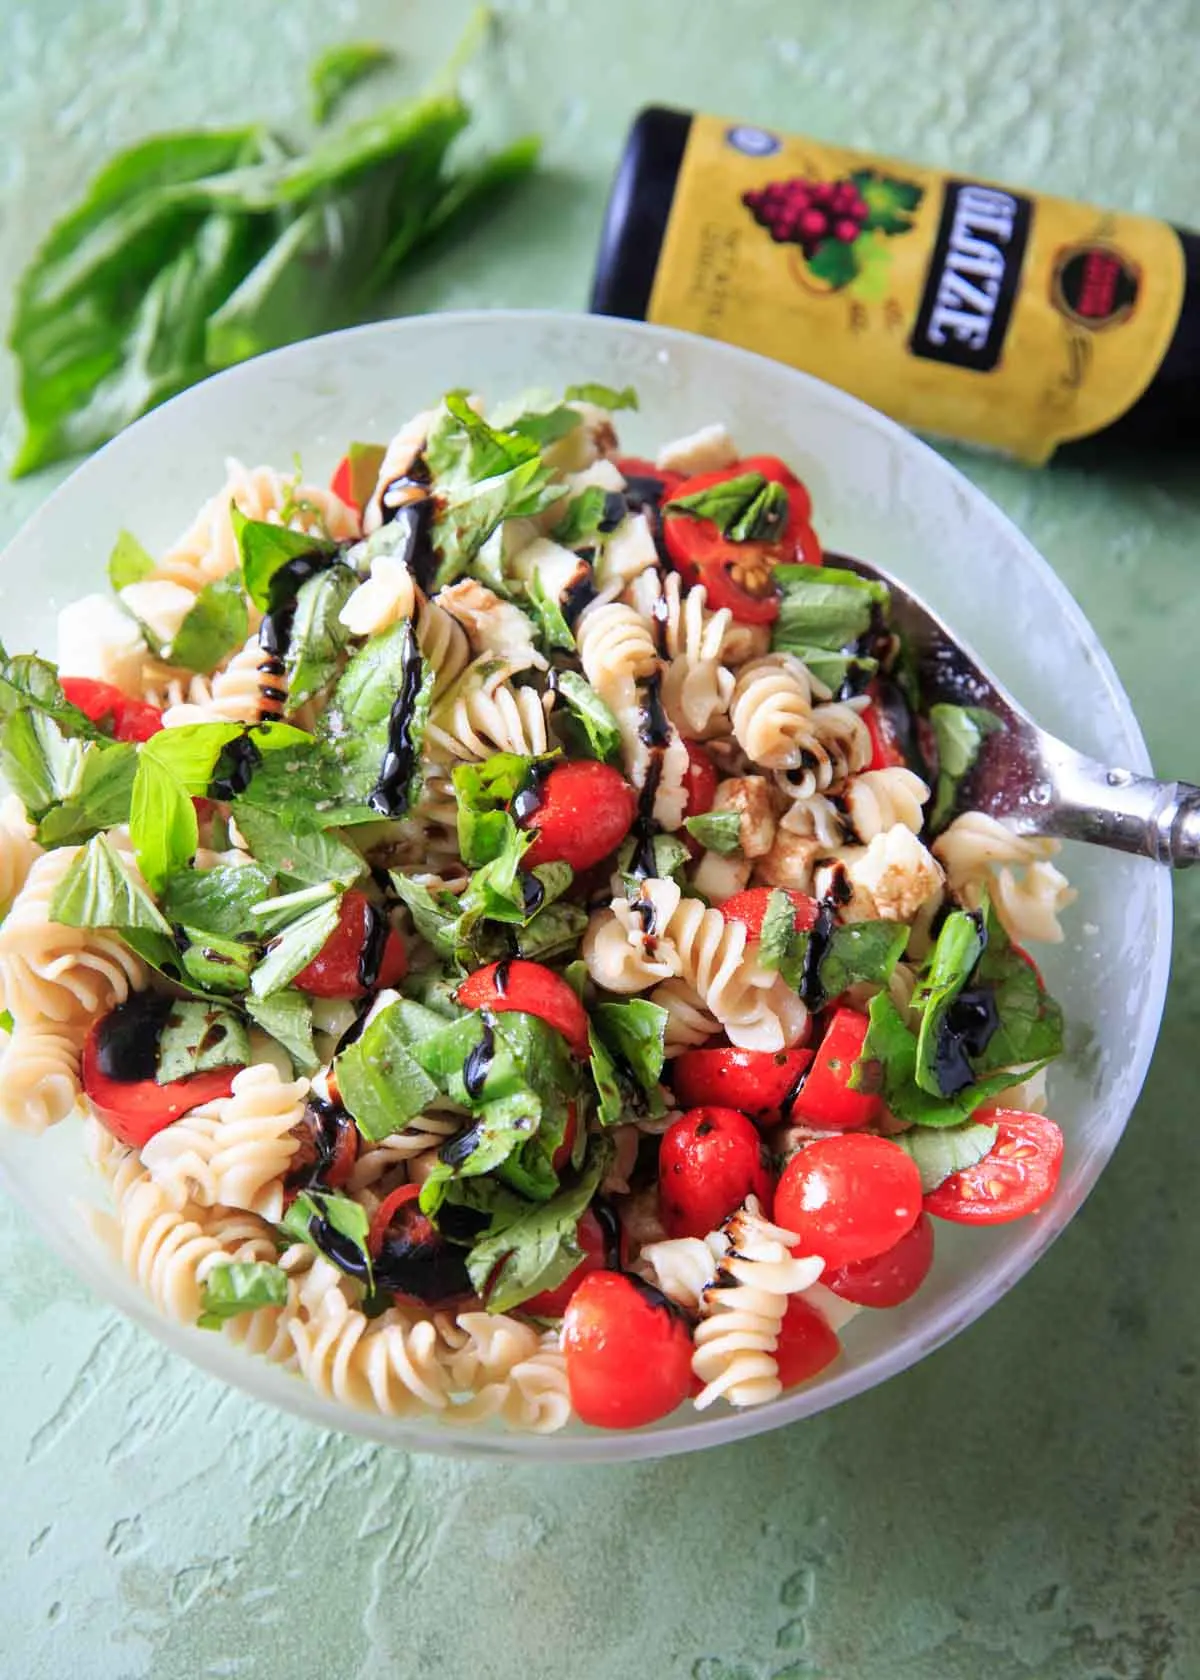 Caprese Pasta Salad topped with balsamic glaze